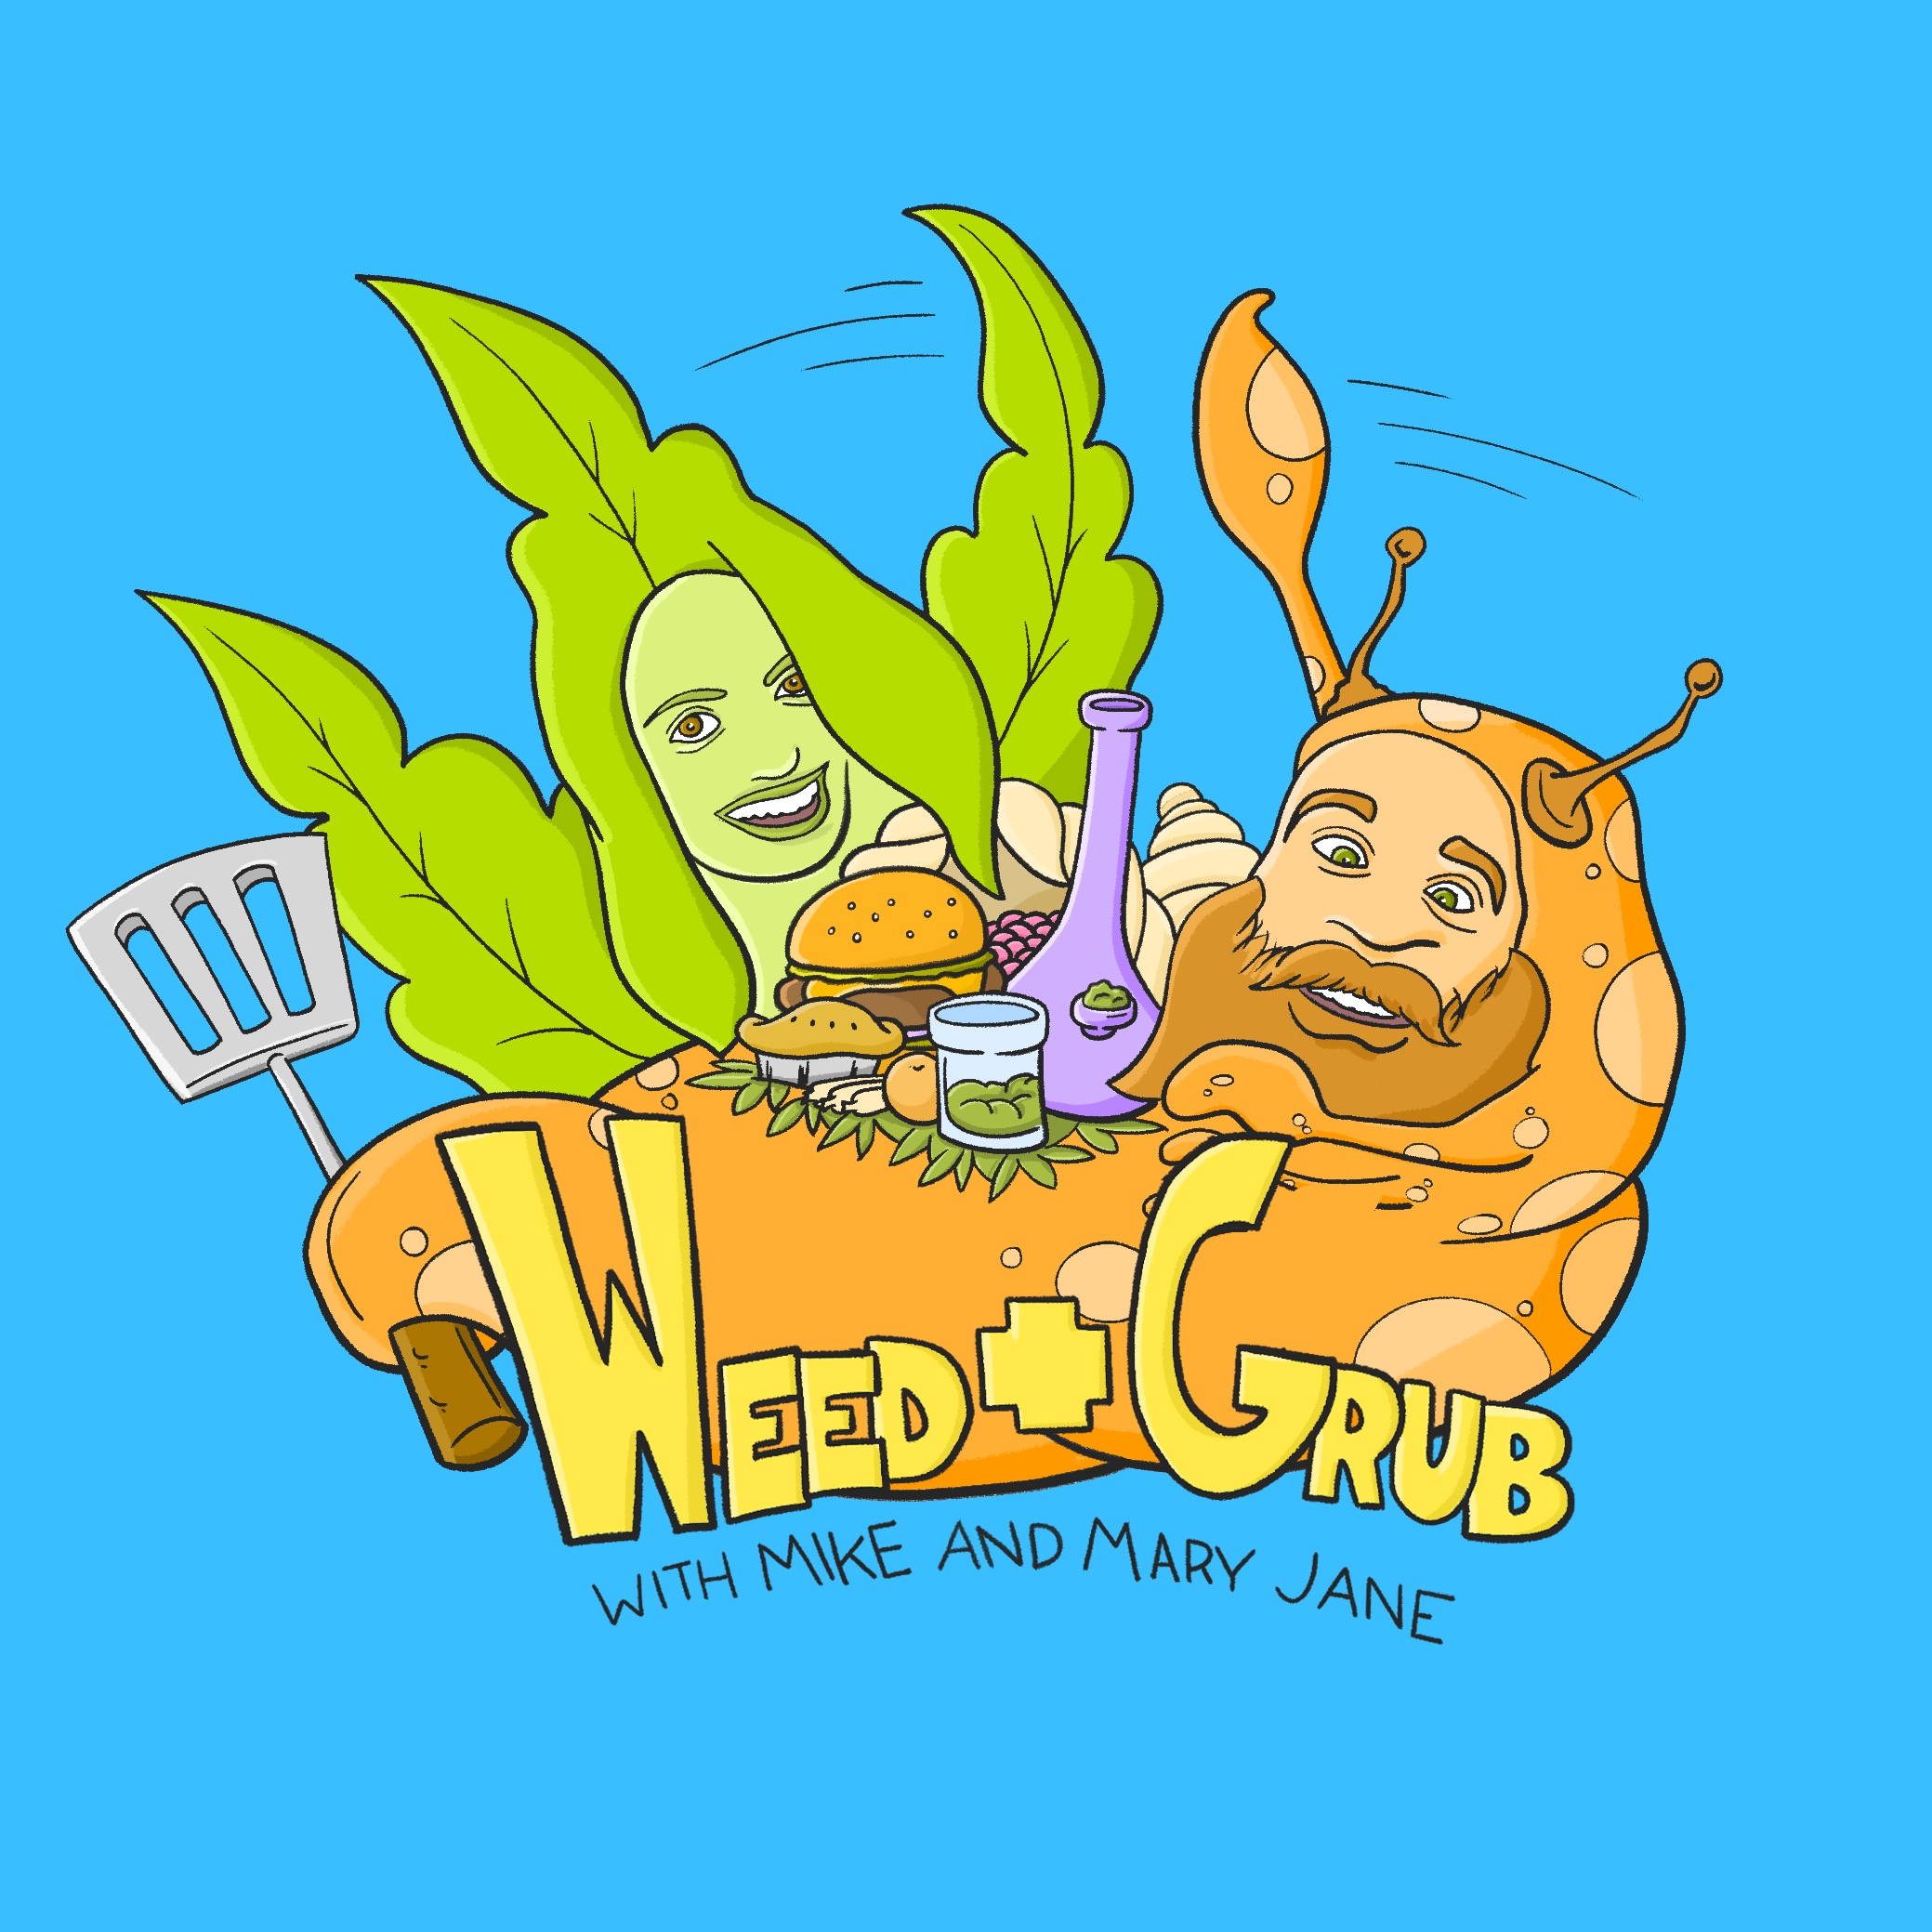 Weed + Grub podcast show image